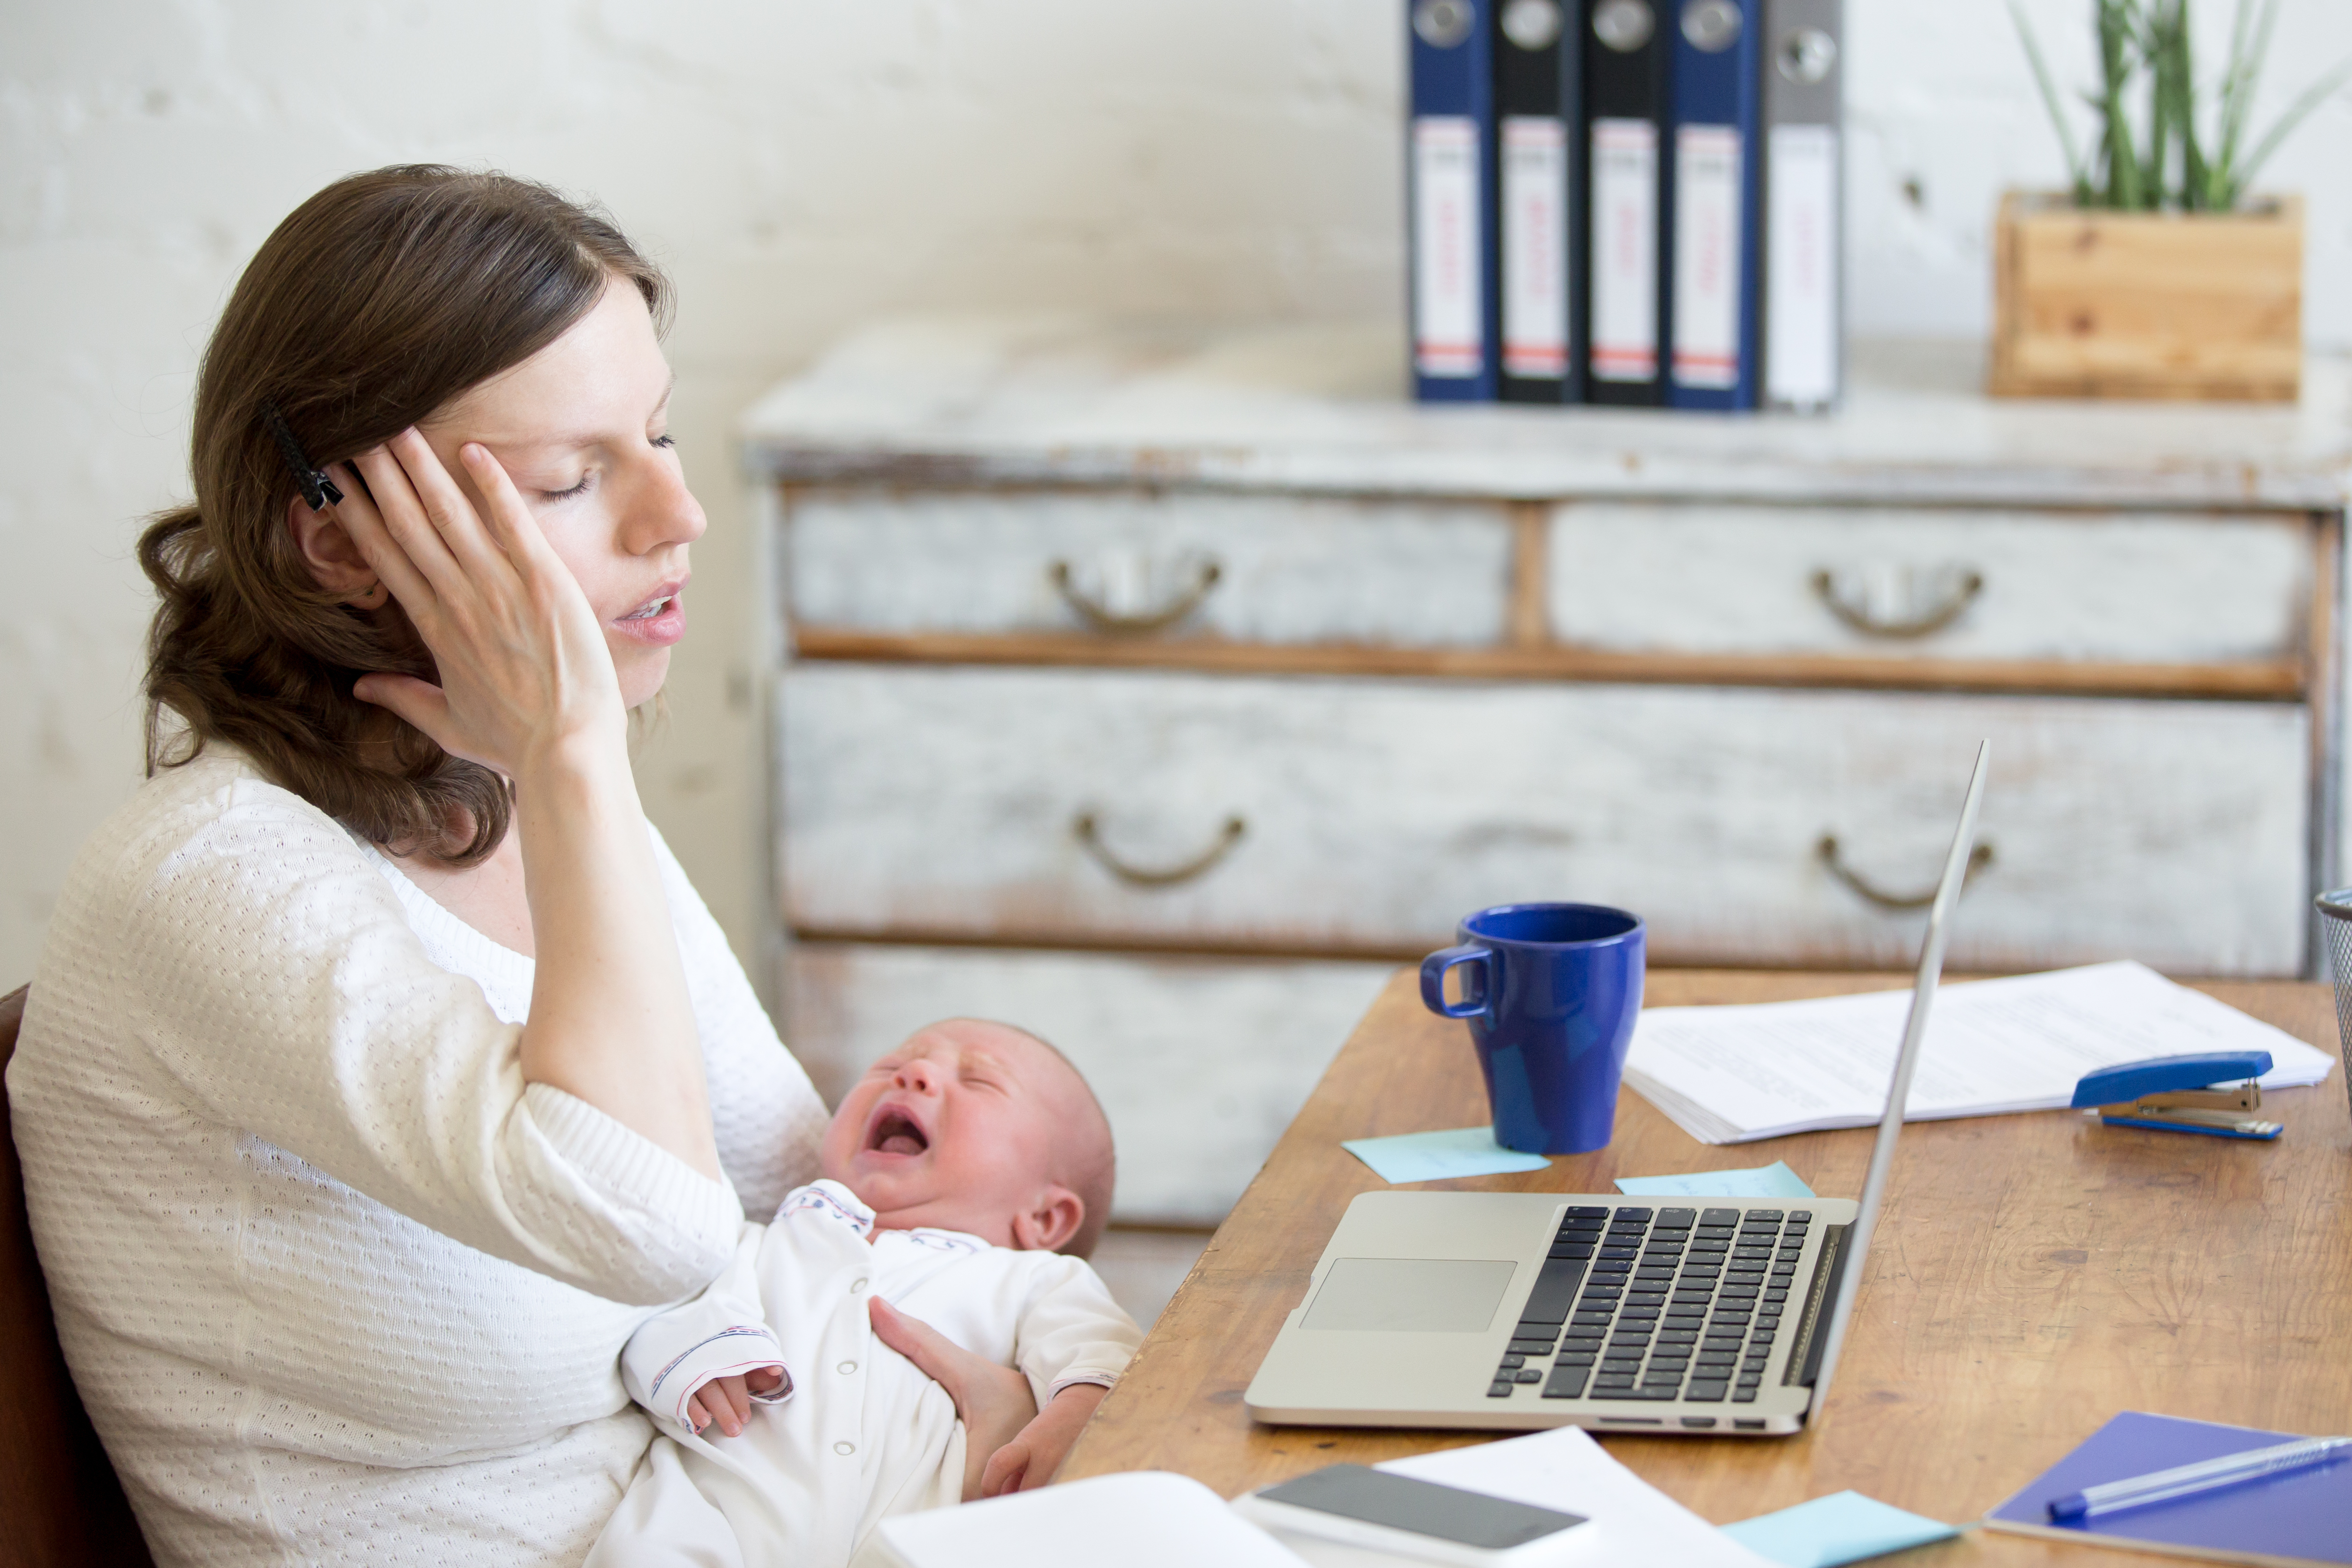 A woman looking stressed while holding a crying newborn baby | Source: Shutterstock